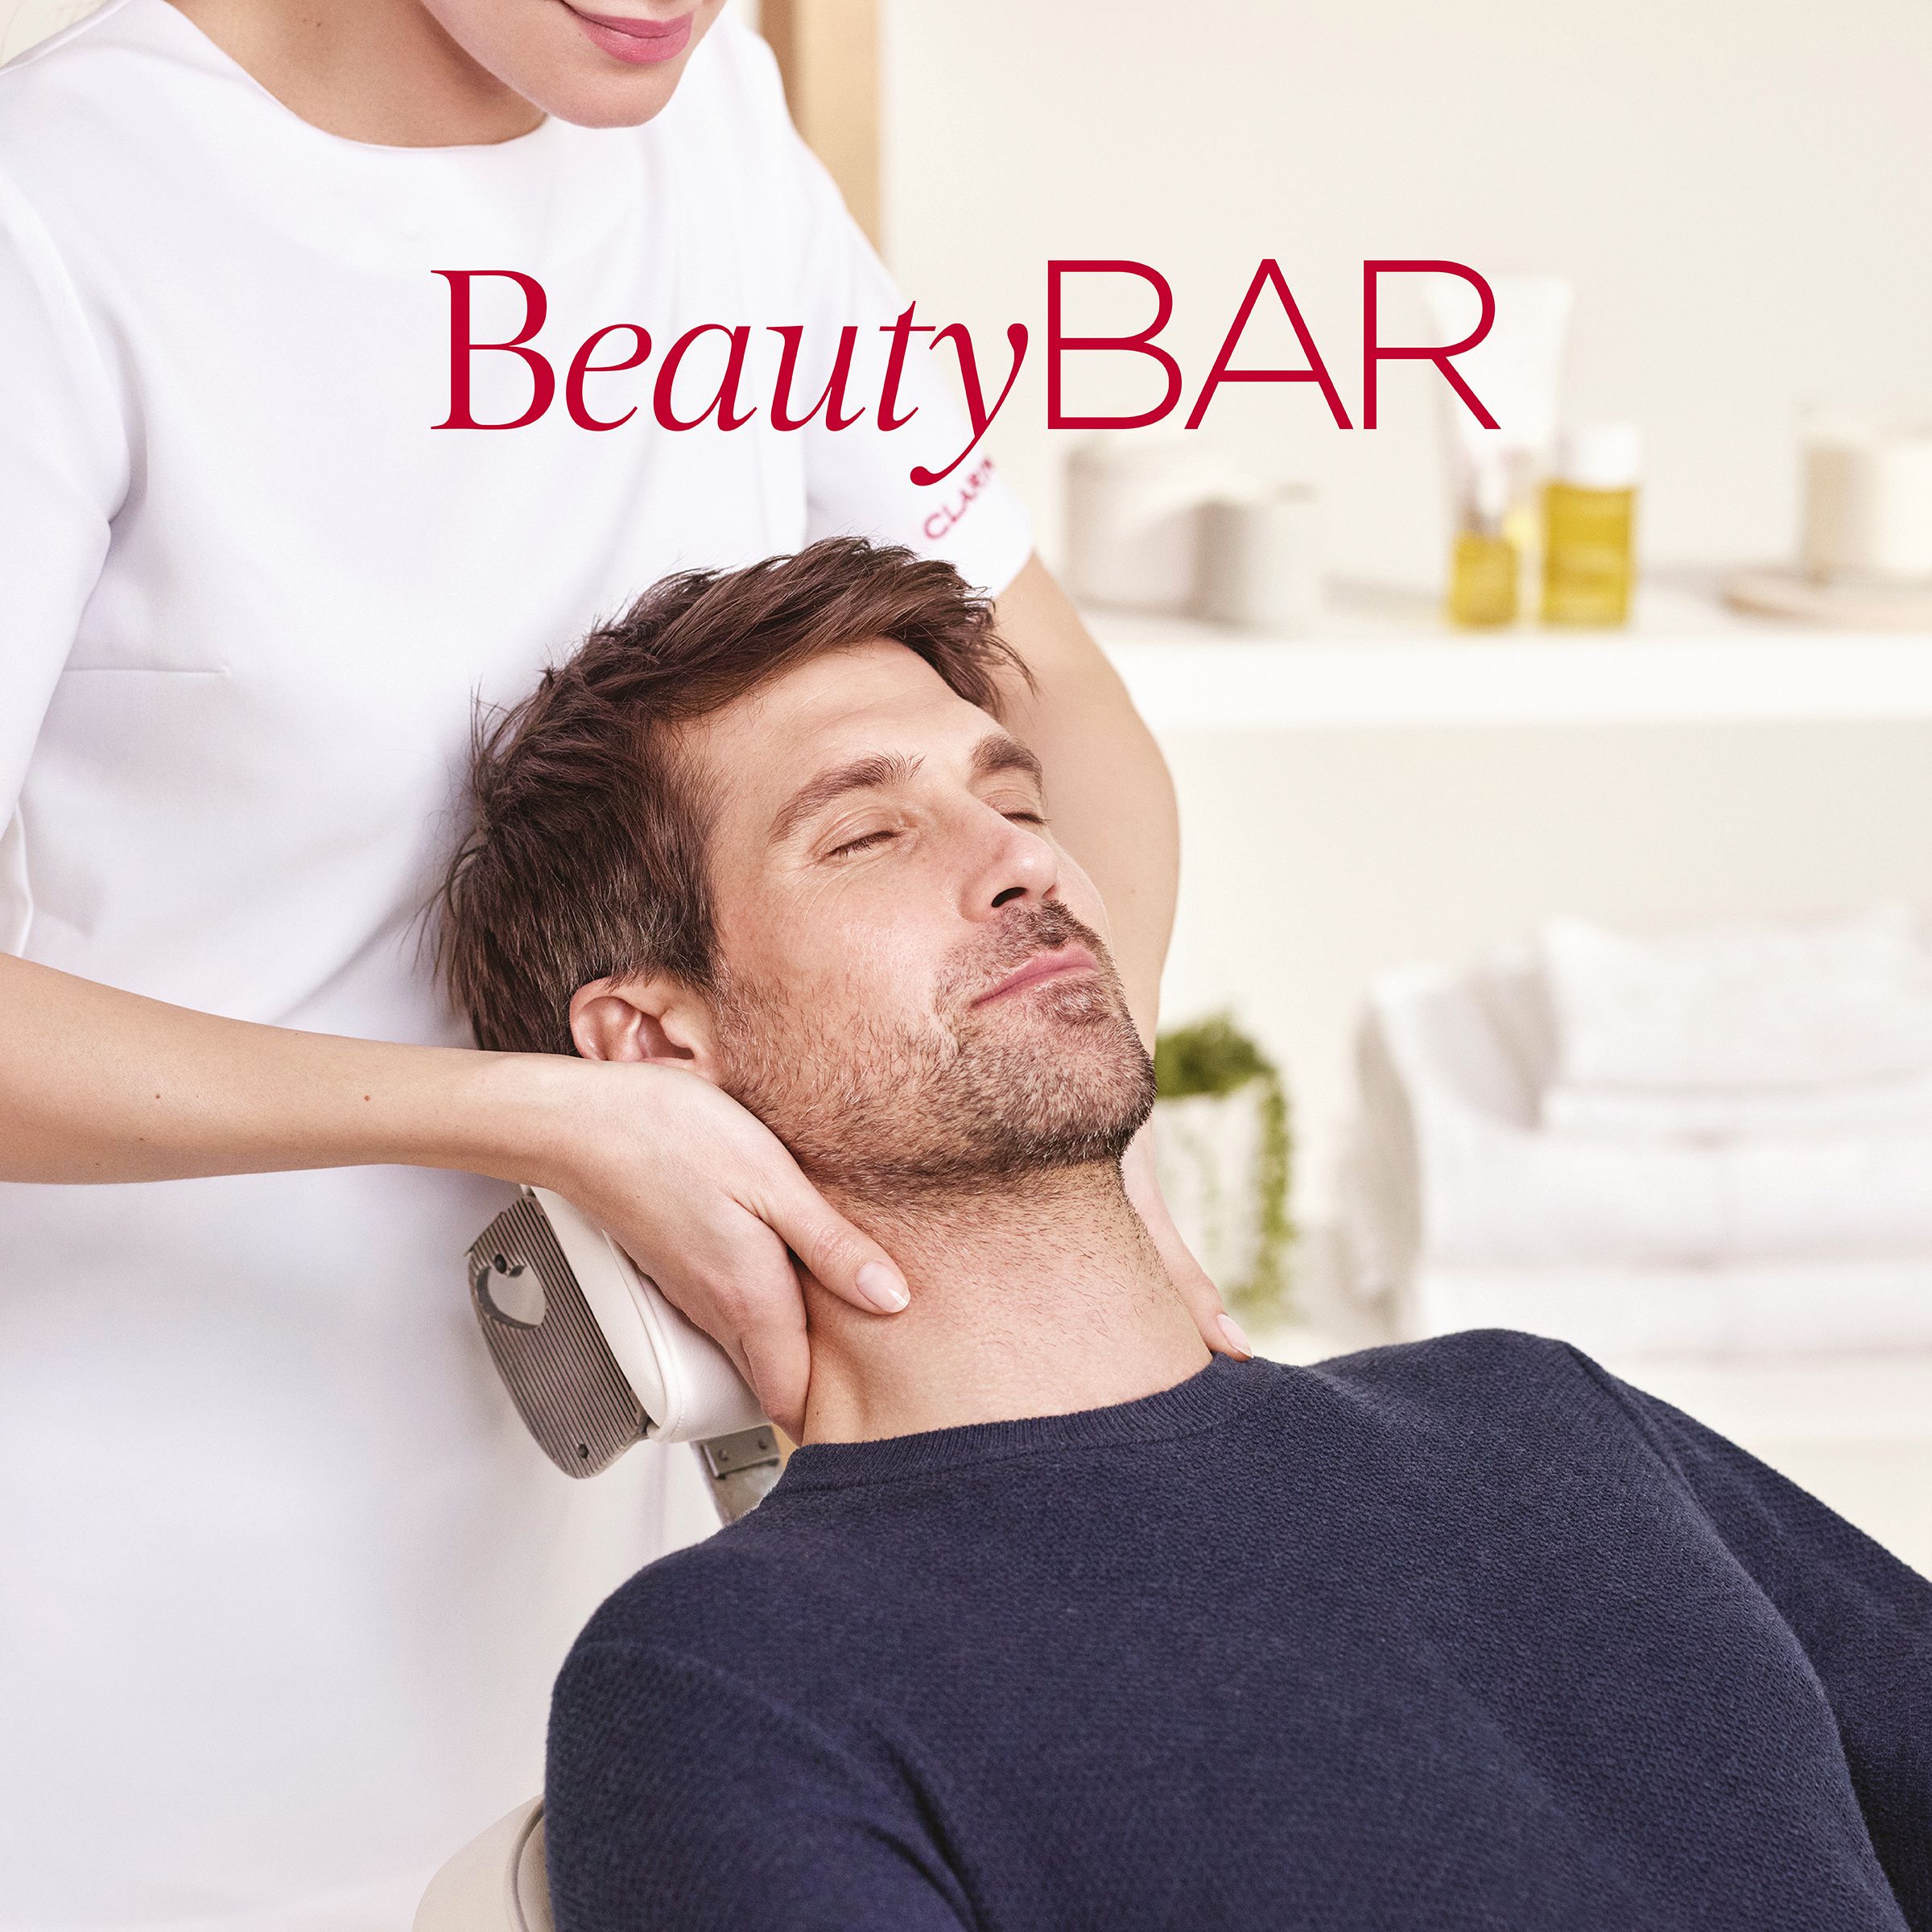 Time out at the BeautyBAR